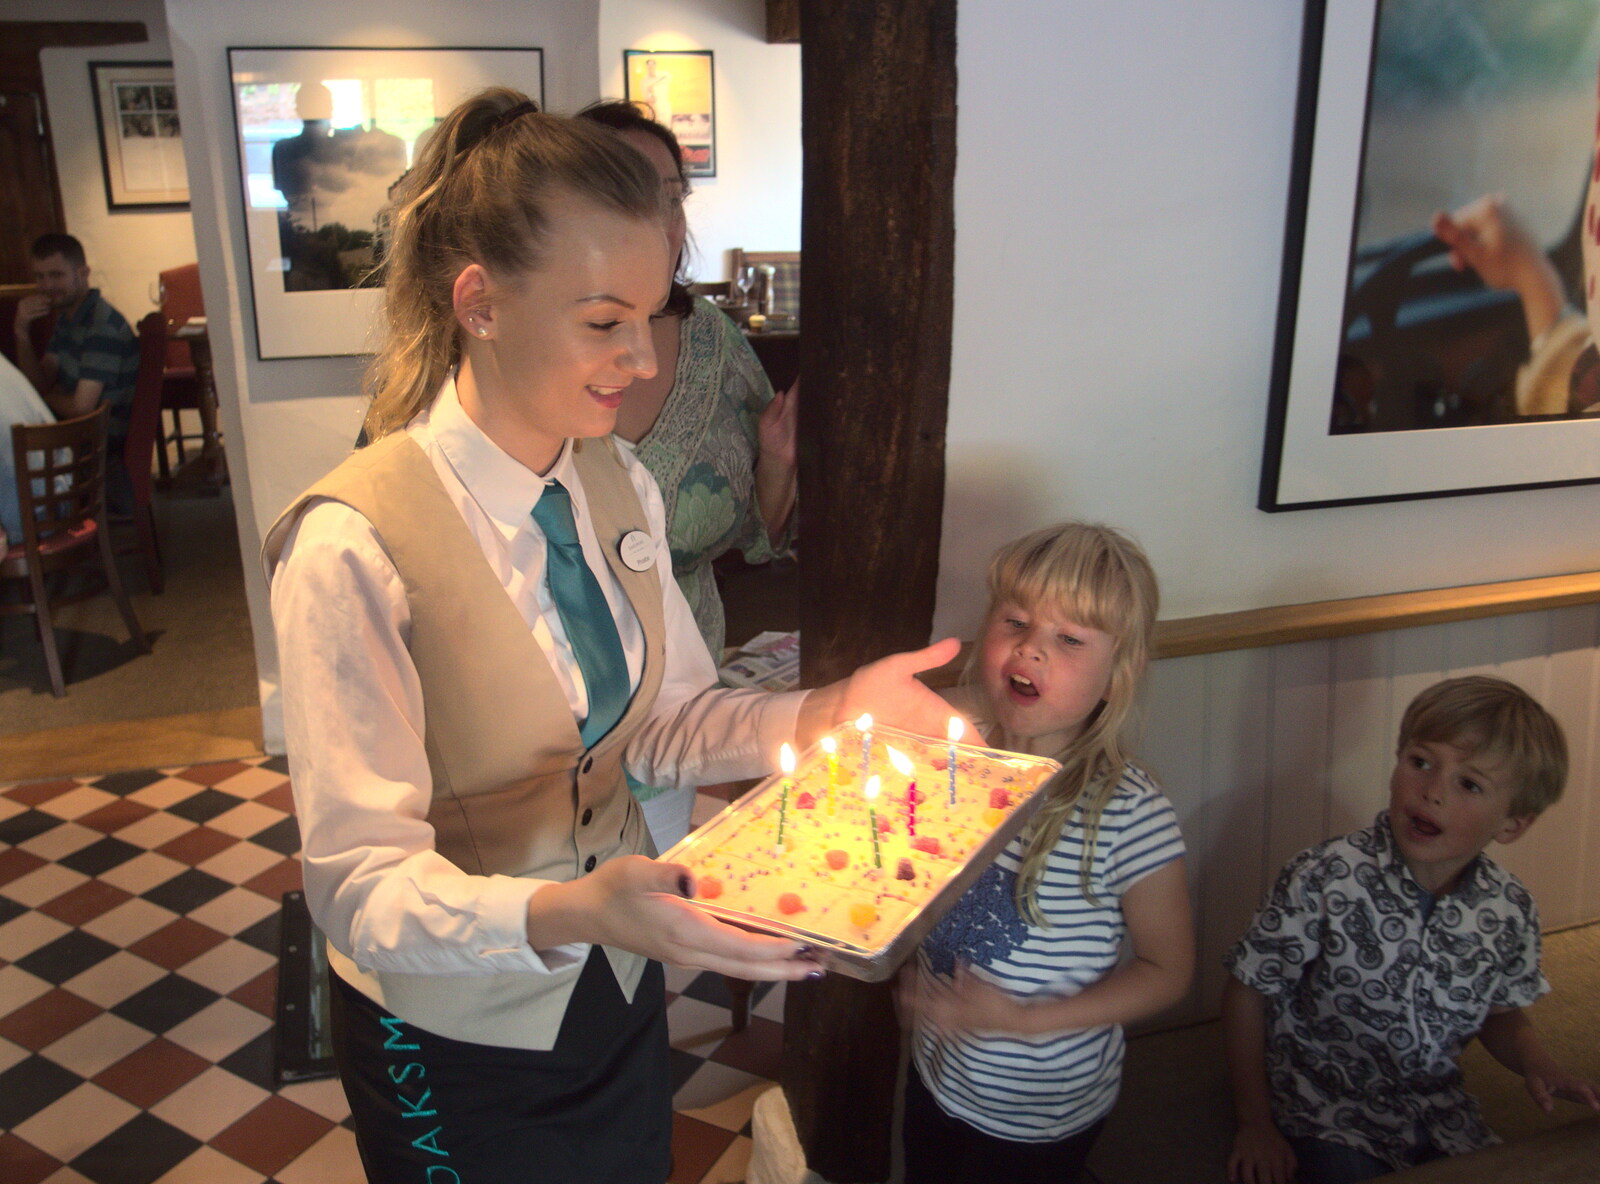 Sophie's birthday cake arrives from Soph the Roph's Birthday and The BBs at Pulham, Norfolk - 22nd July 2015